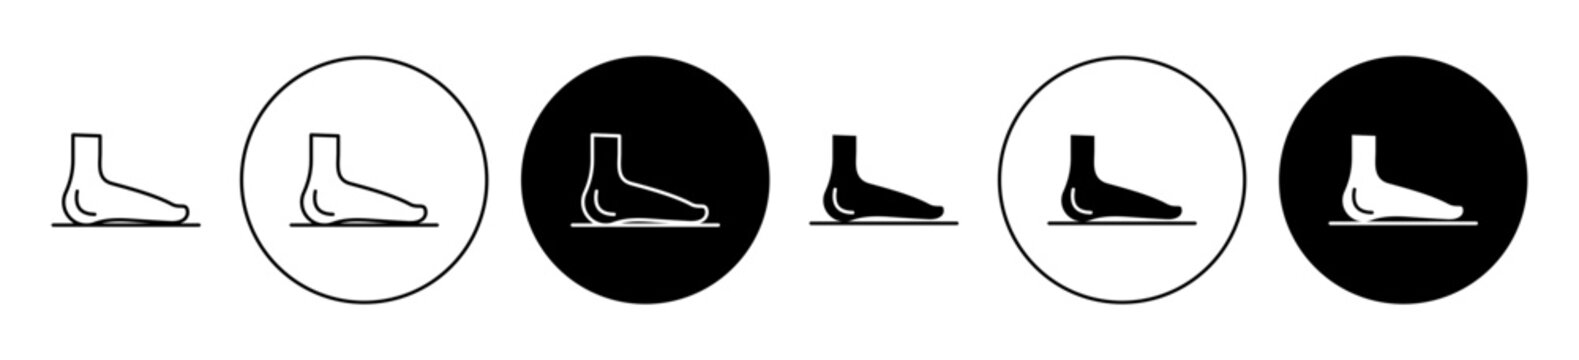 Foot icon set. bare feet sign. ankle joint pain vector symbol in black filled and outlined style.